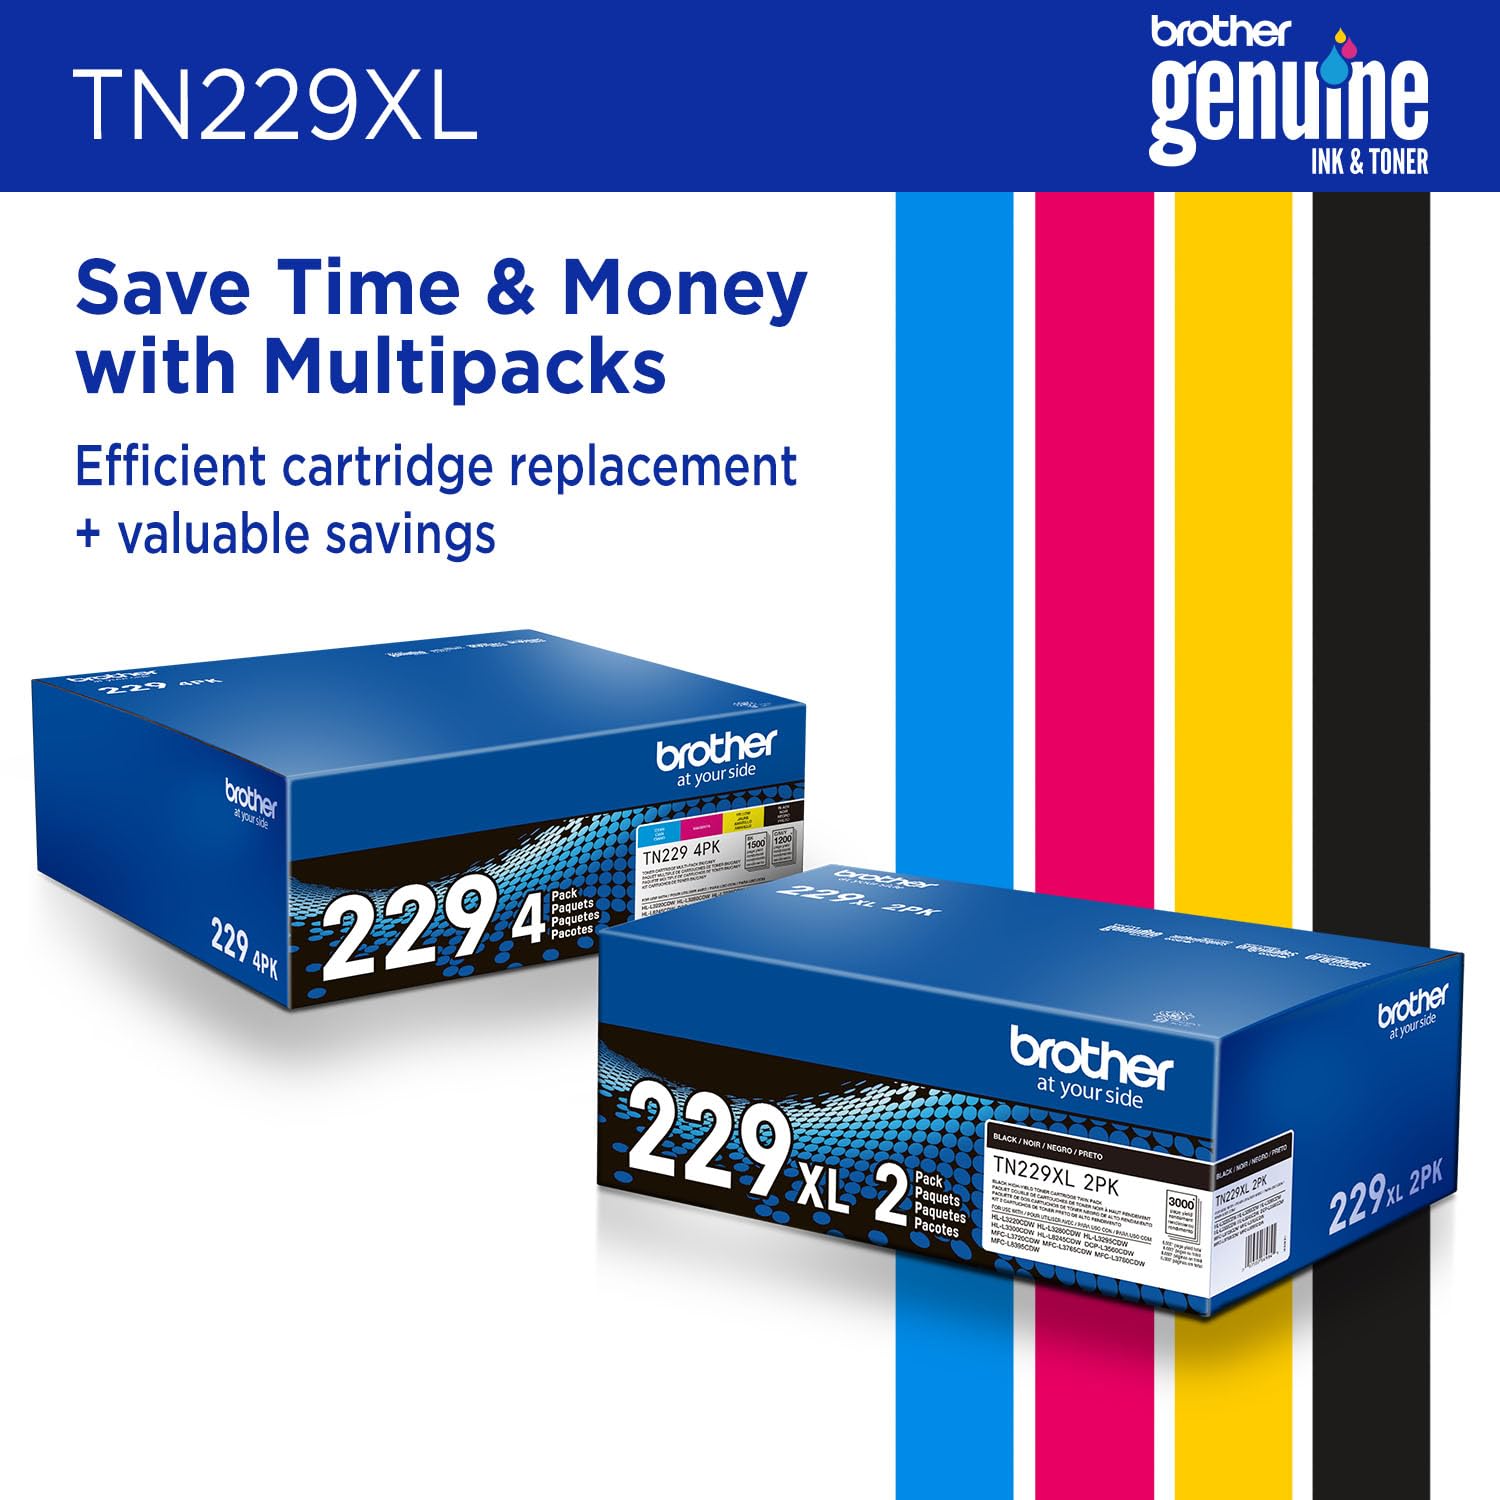 Brother Genuine TN229XLM Magenta High Yield Printer Toner Cartridge - Print up to 2,300 Pages(1)